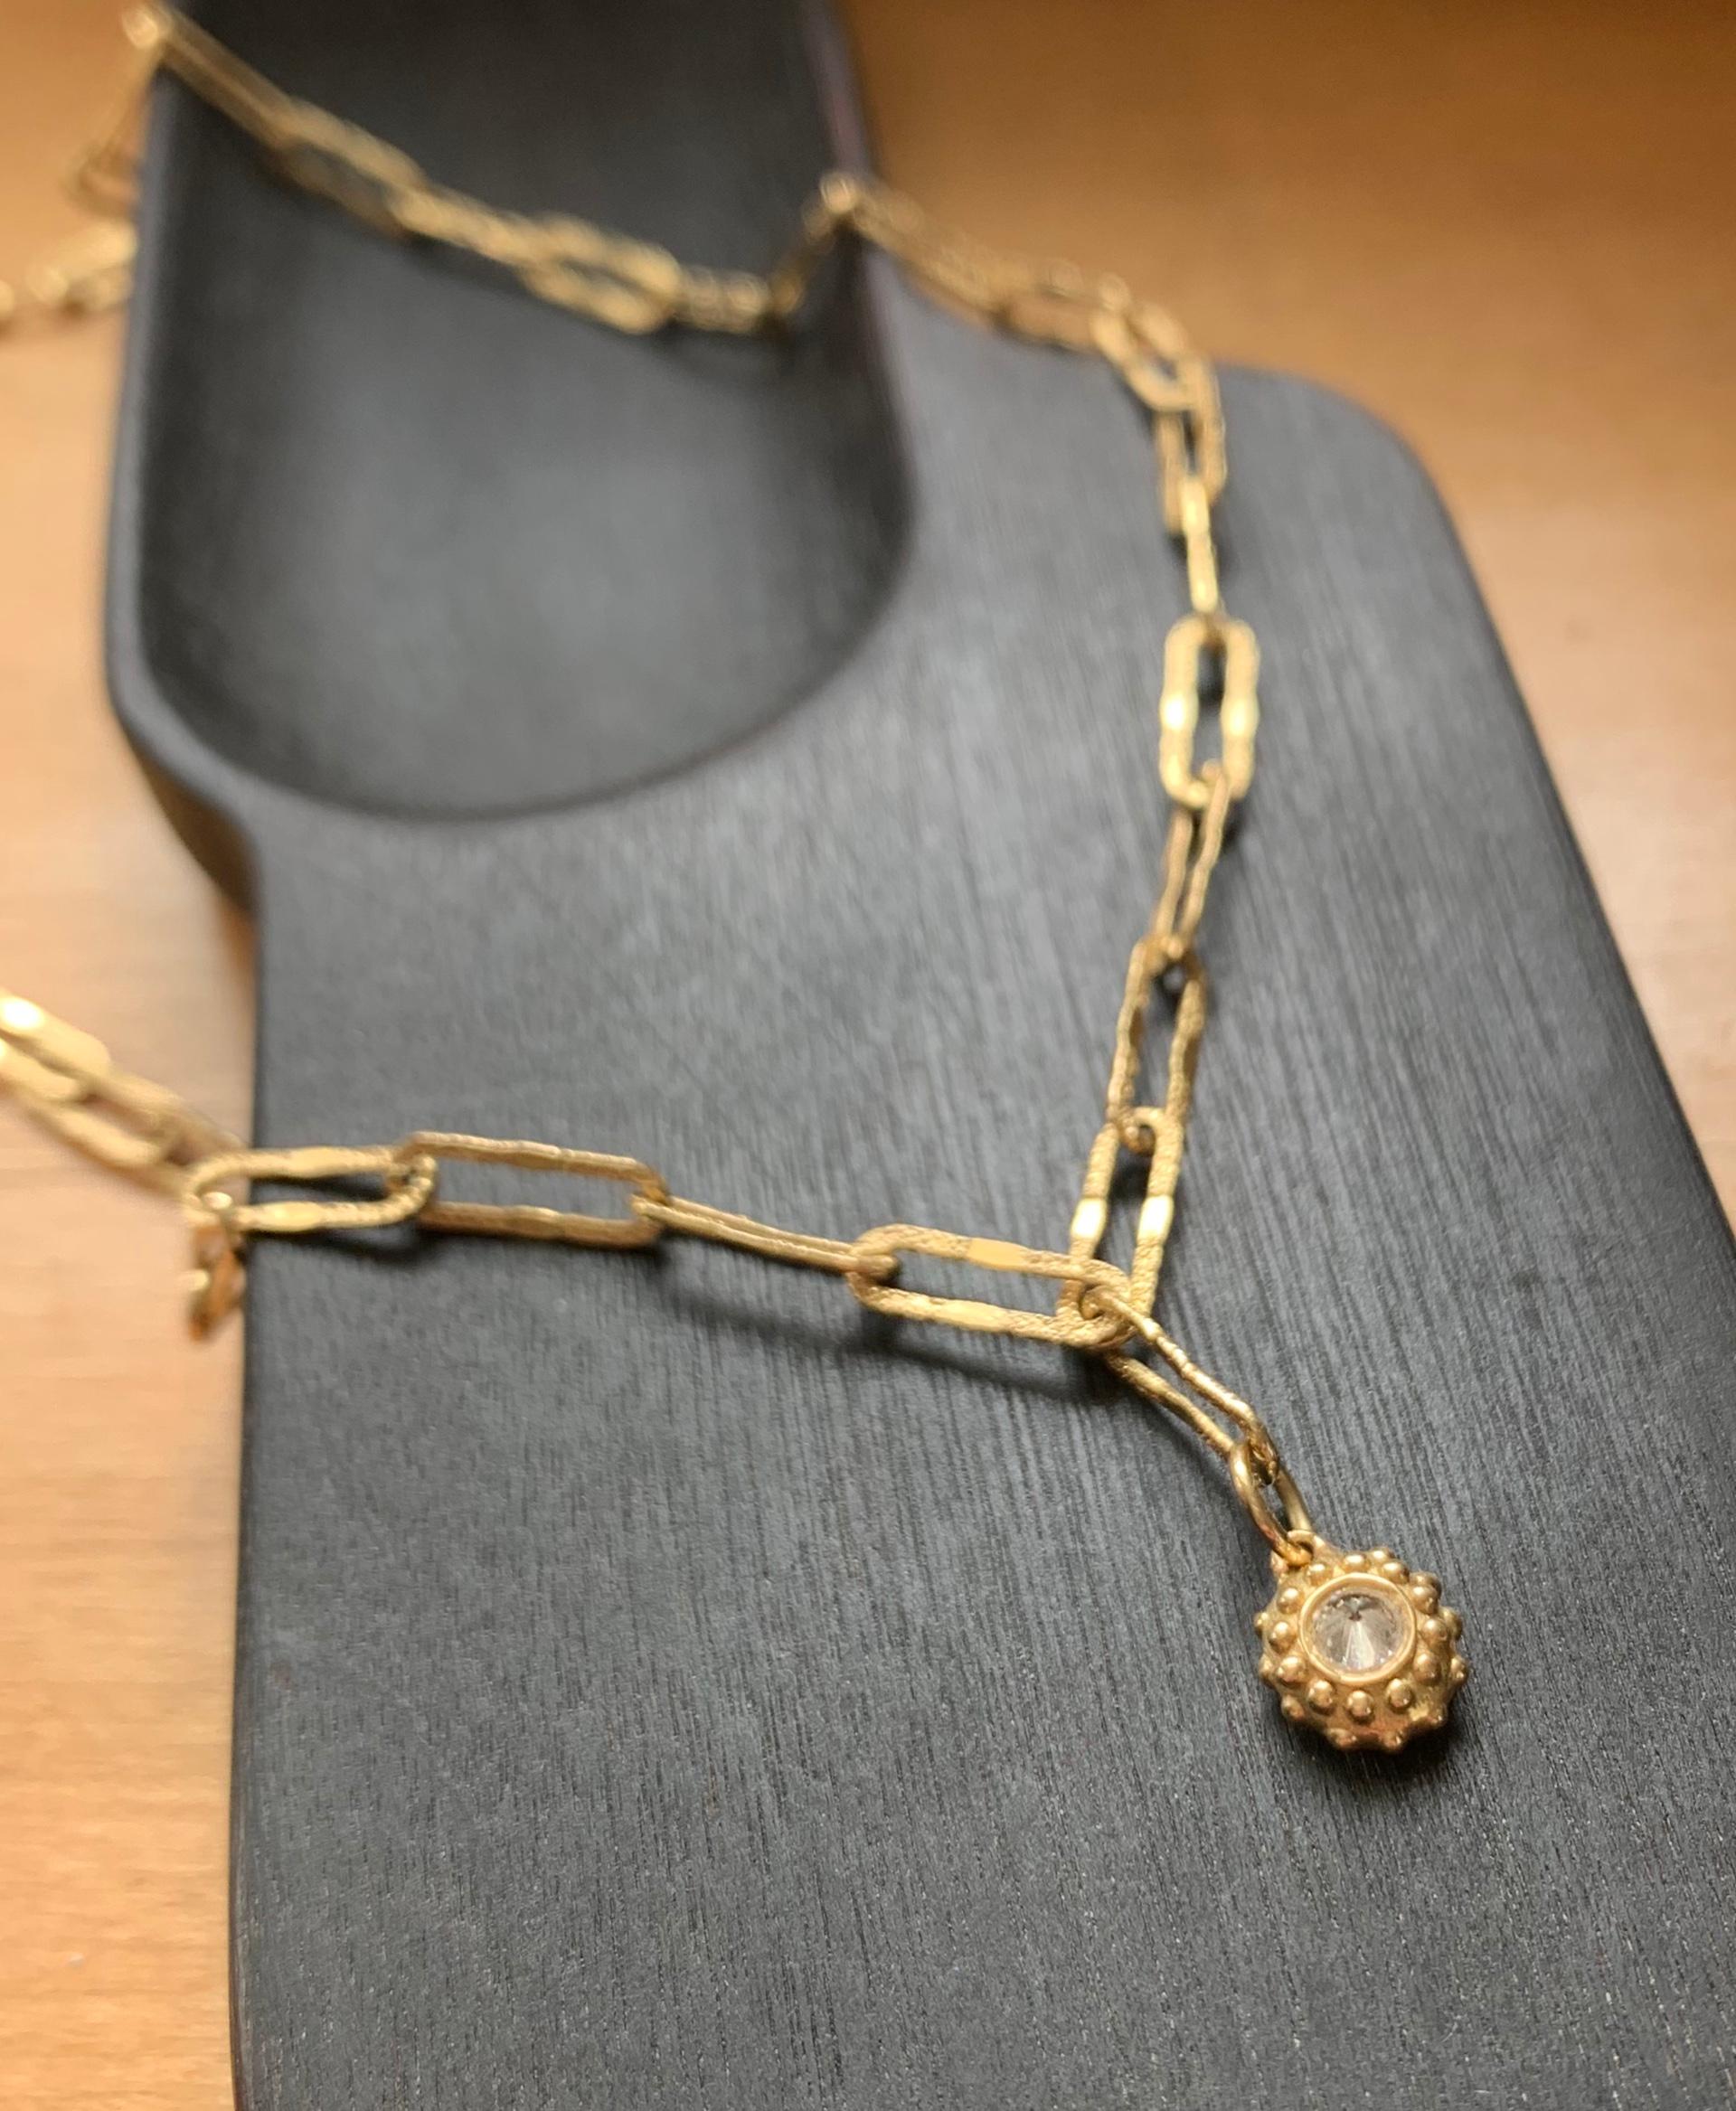 An inverted white diamond is set in an organic form of yellow gold suspended from a stunning hand-made chain to create the simple and elegant 'California Dreaming' Necklace. The hand-made 18k gold chain has a stone-etched finish creating a texture